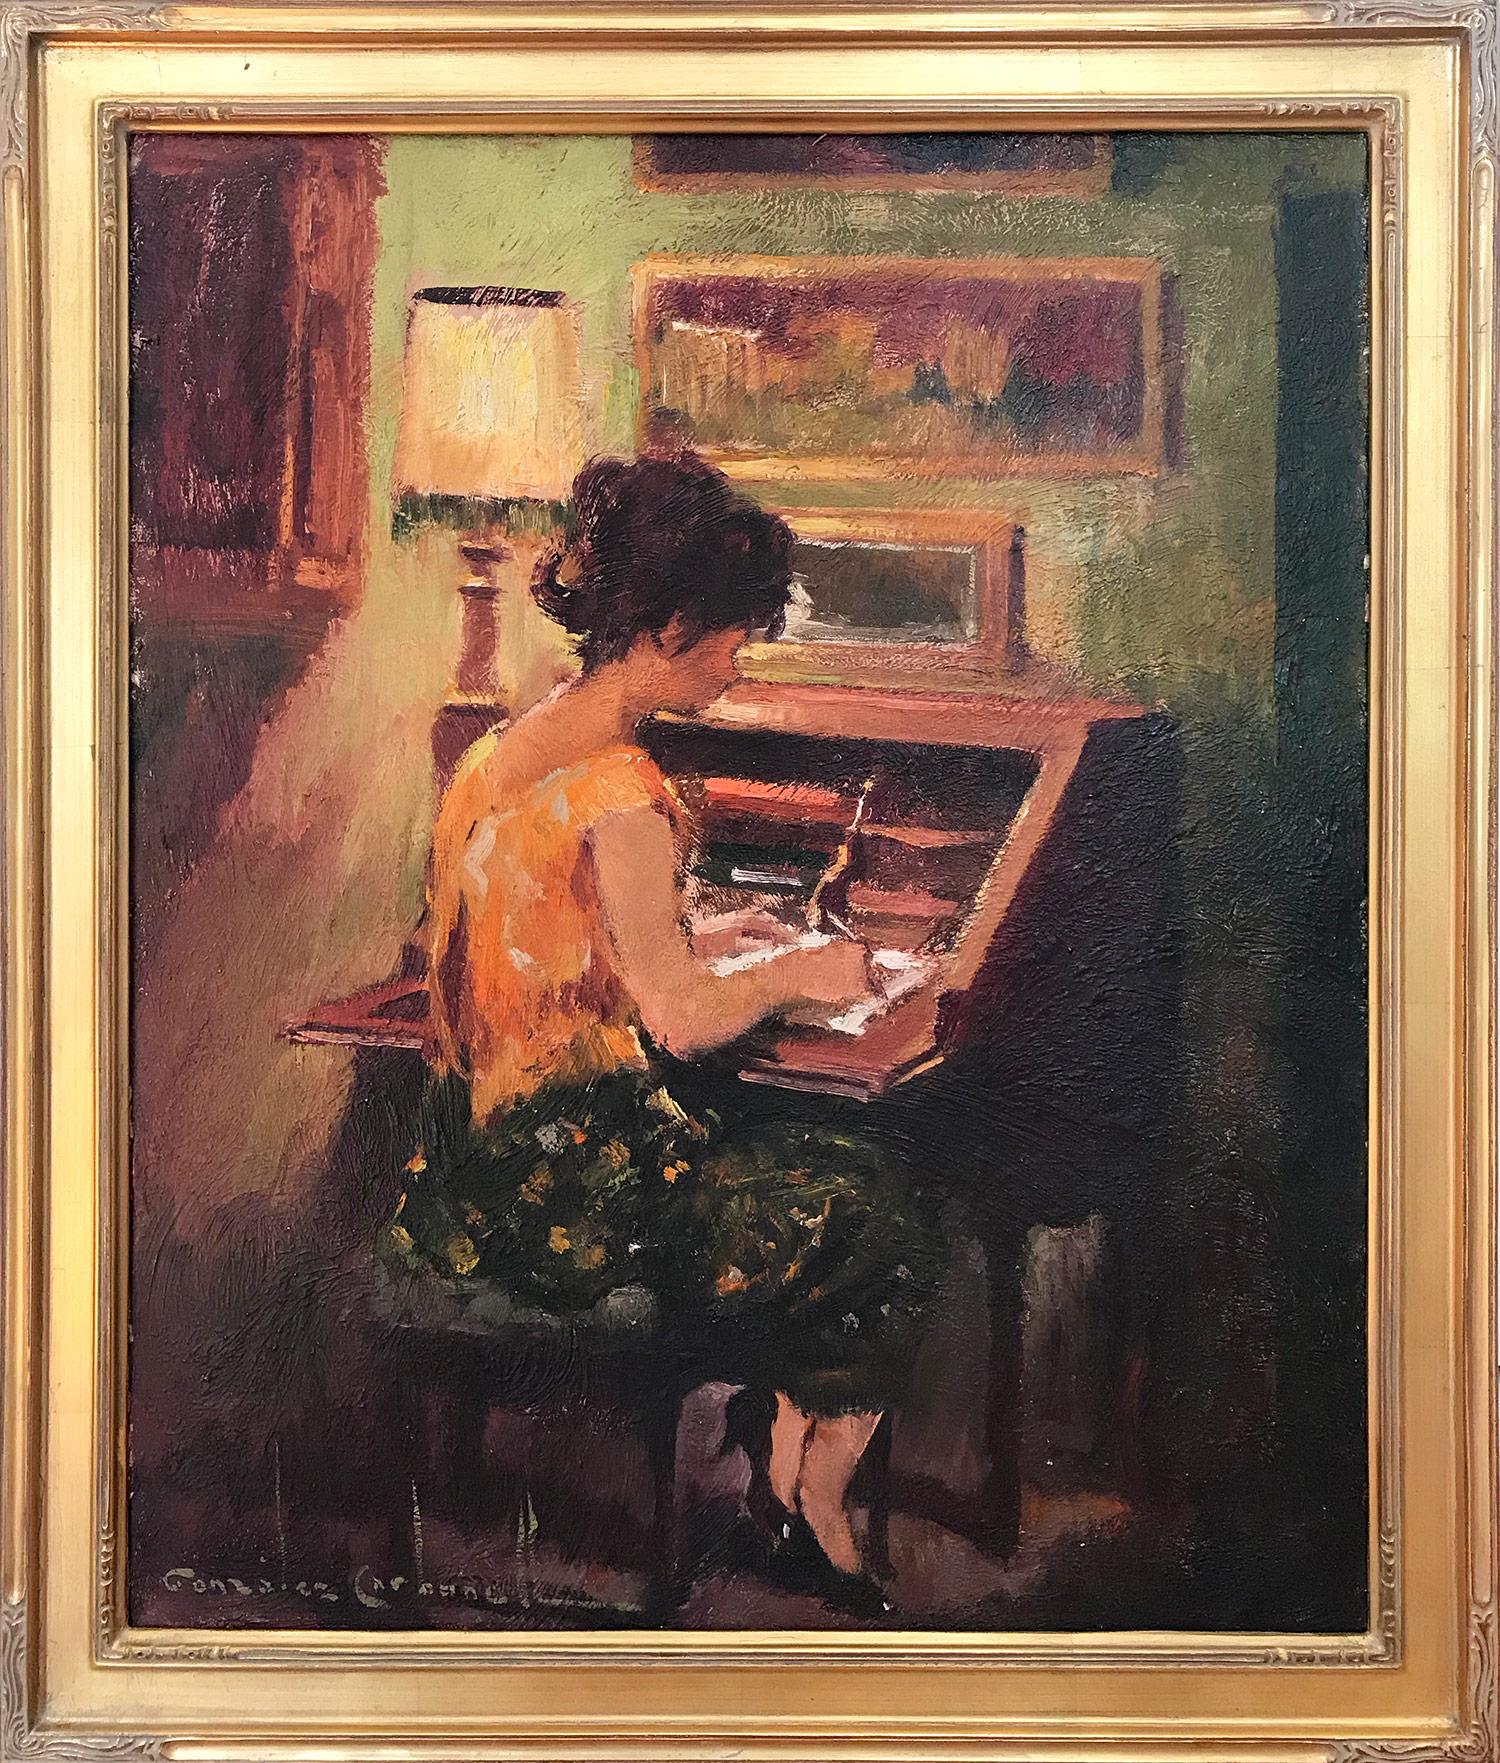 An impressionist oil painting depicted in the 1940's by Spanish painter Carbonelle. Mostly known for his figures and portraits of the female form, his oils on canvas are a rich experience with great use of texture. This painting is a wonderful